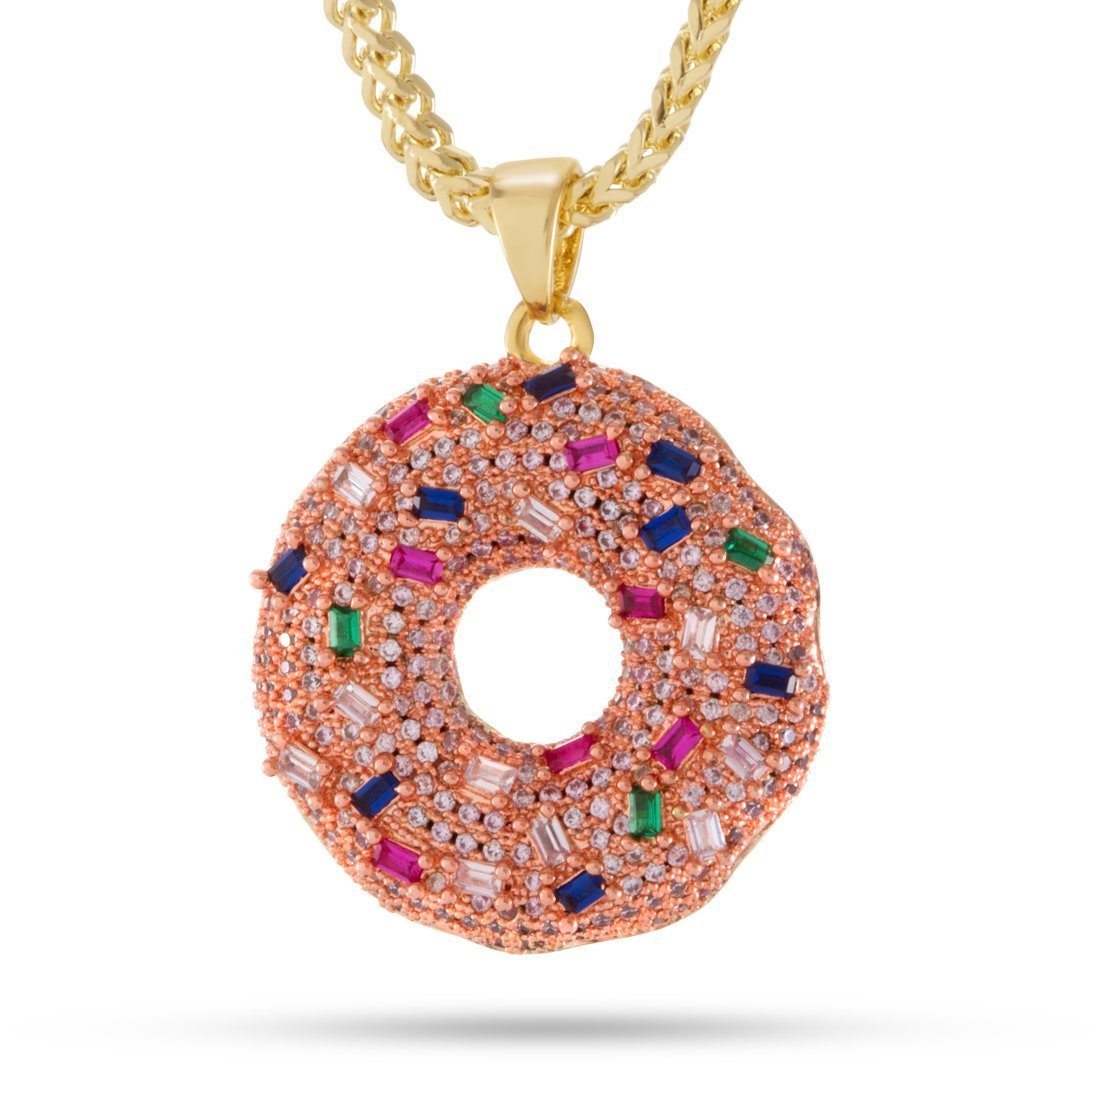 The Pink Donut Necklace